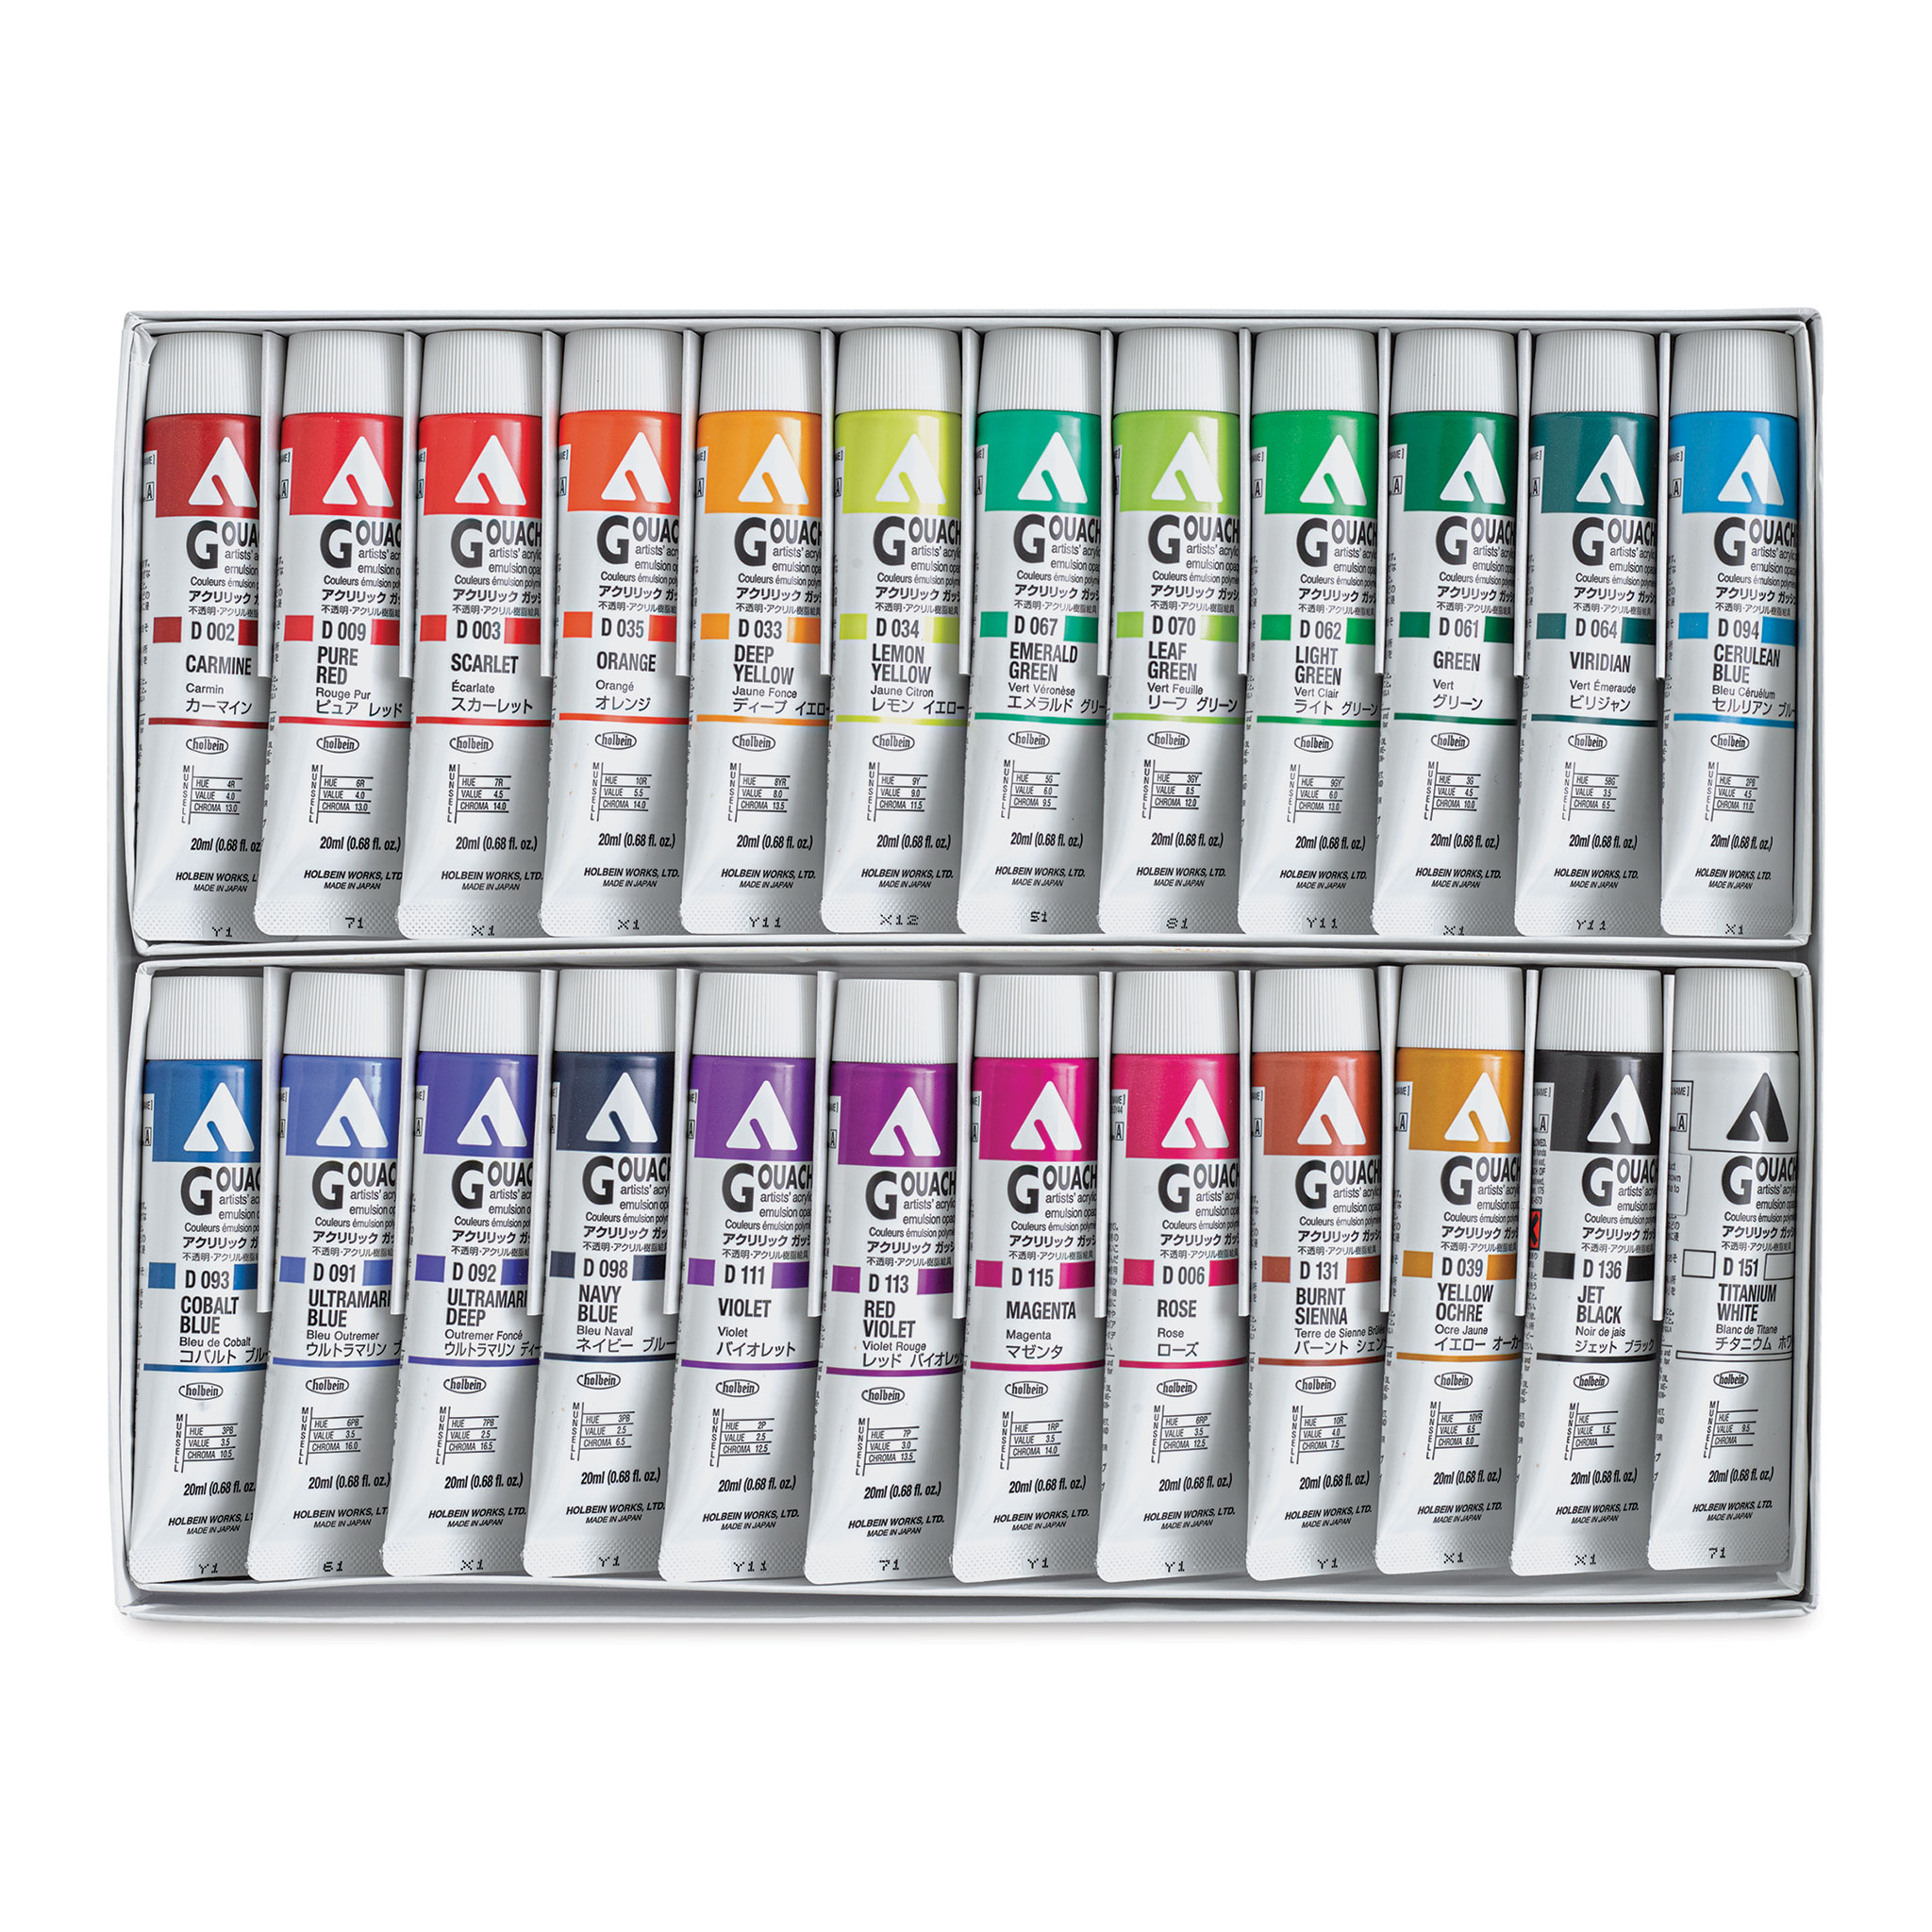 Turner Acryl Gouache set of 36 Colors in 20 ml